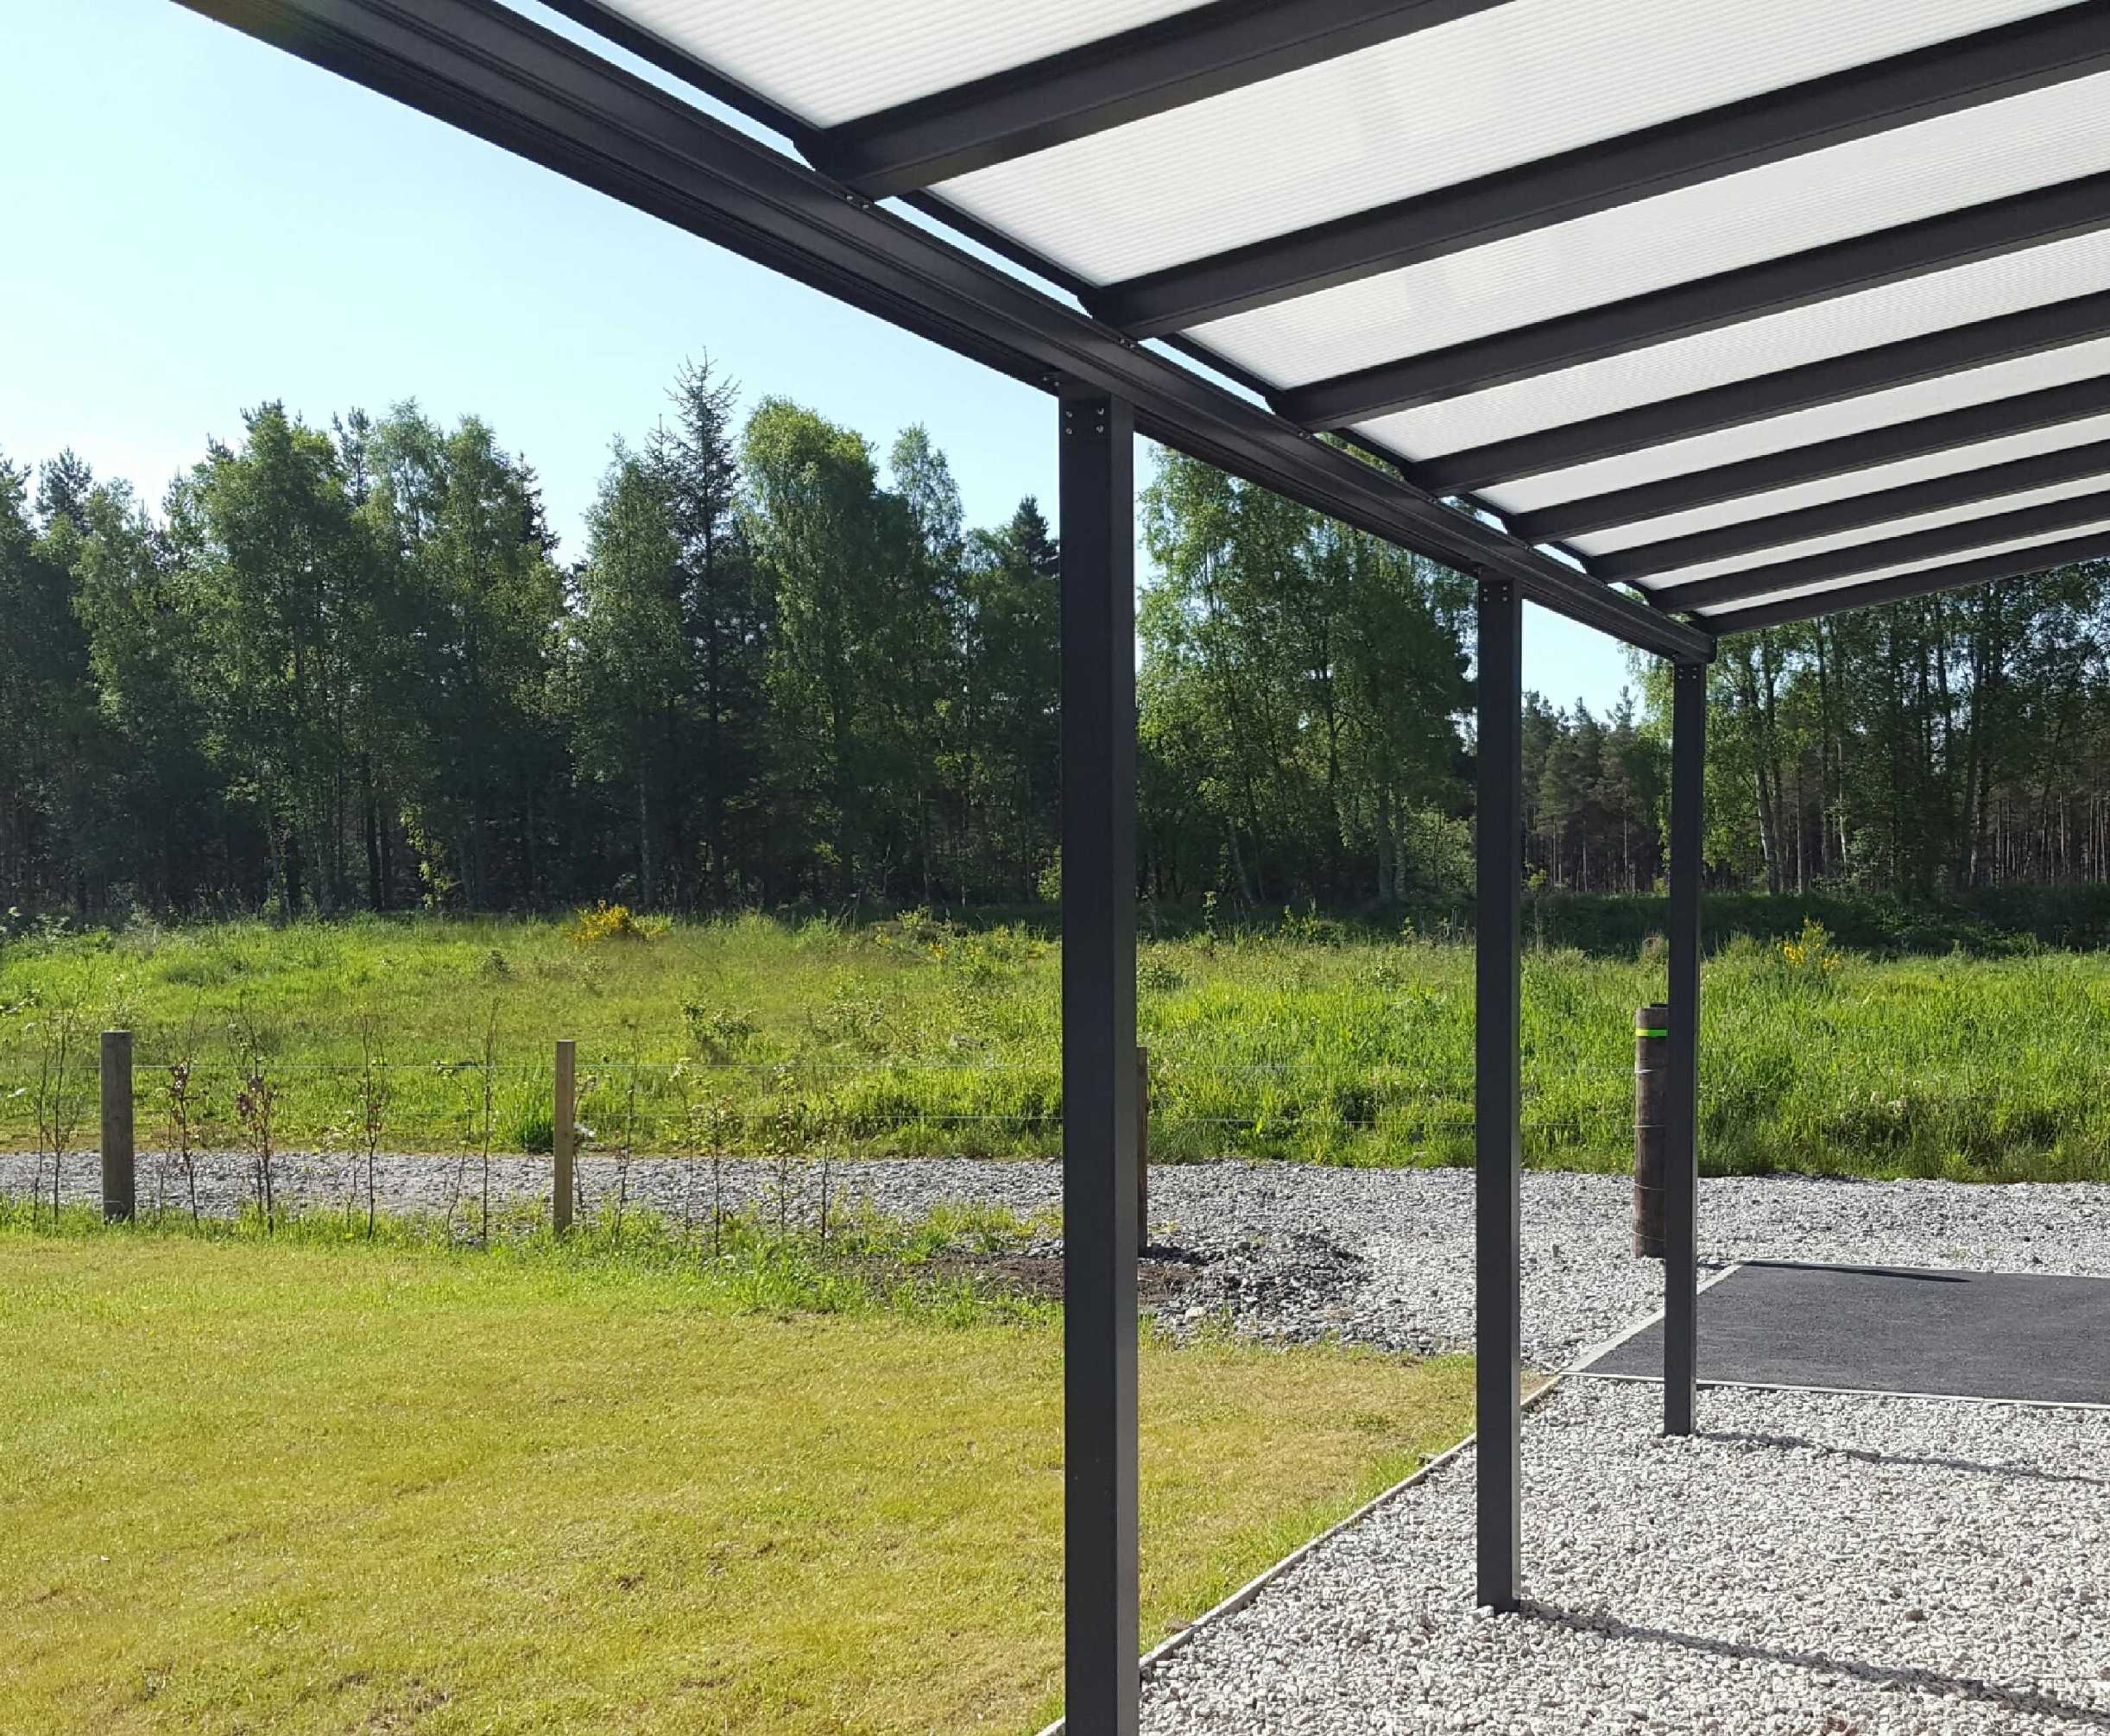 Omega Smart Lean-To Canopy, Anthracite Grey, 6mm Glass Clear Plate Polycarbonate Glazing - 4.2m (W) x 2.5m (P), (3) Supporting Posts